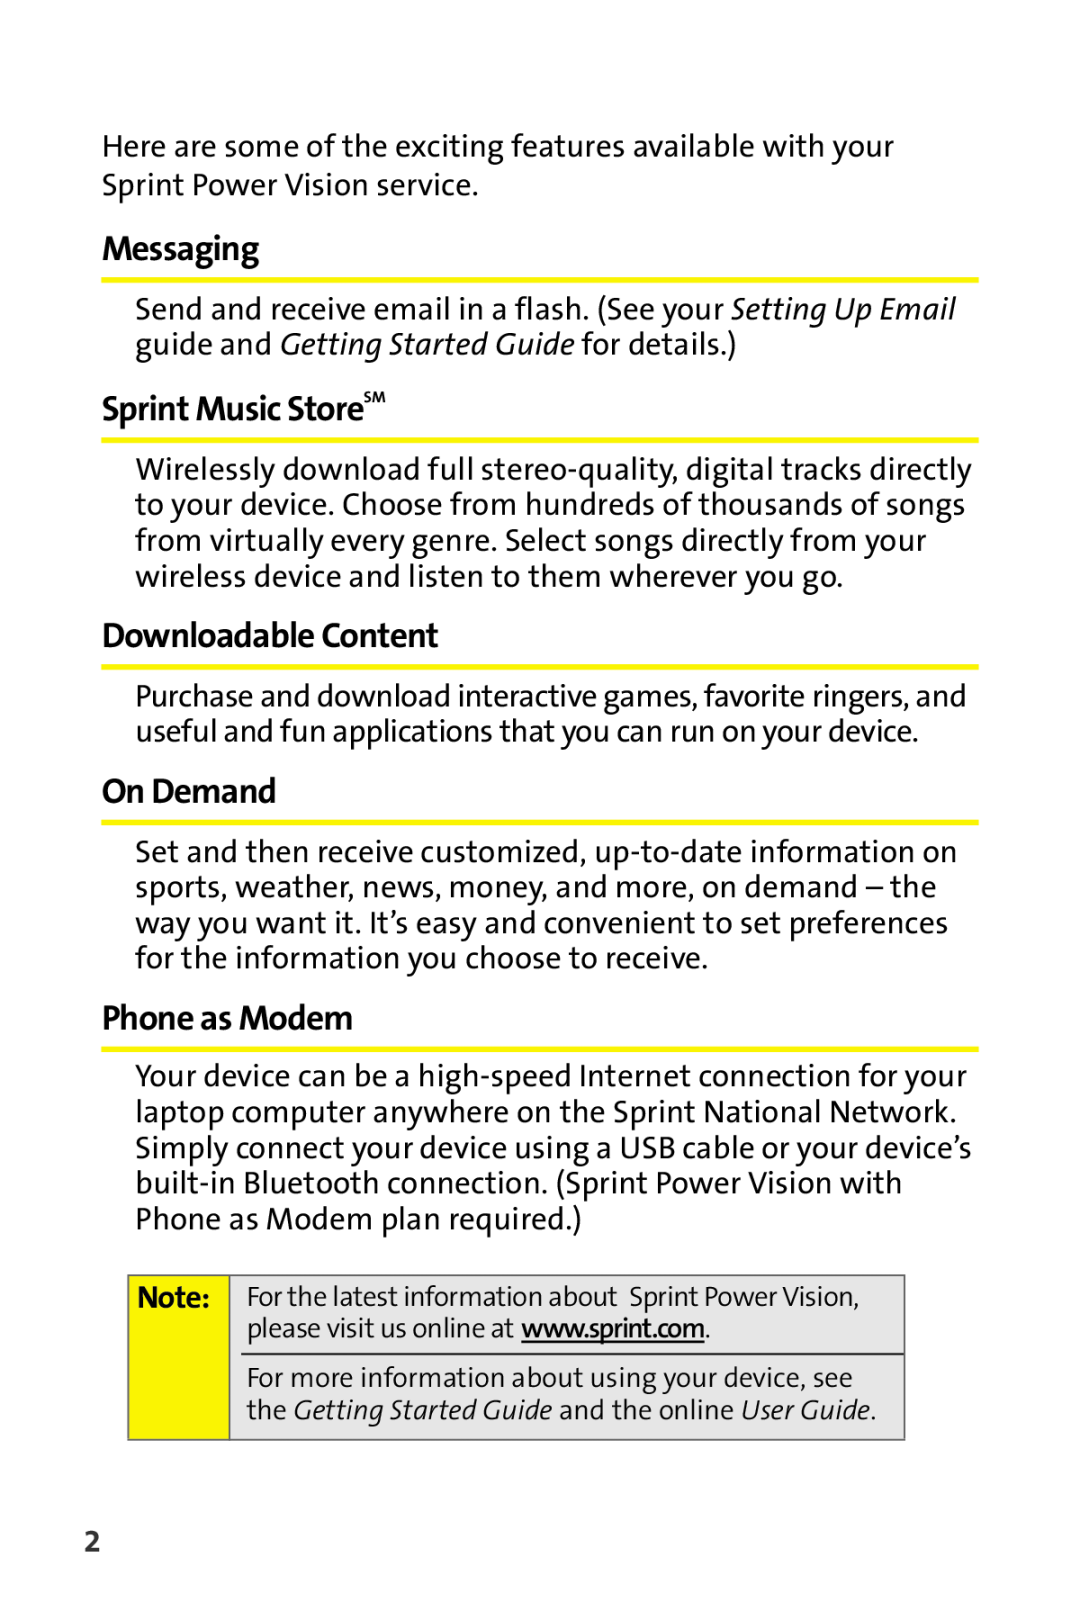 Sprint Nextel Stereo Receiver manual Messaging, Sprint Music StoreSM, Downloadable Content, On Demand, Phone as Modem 